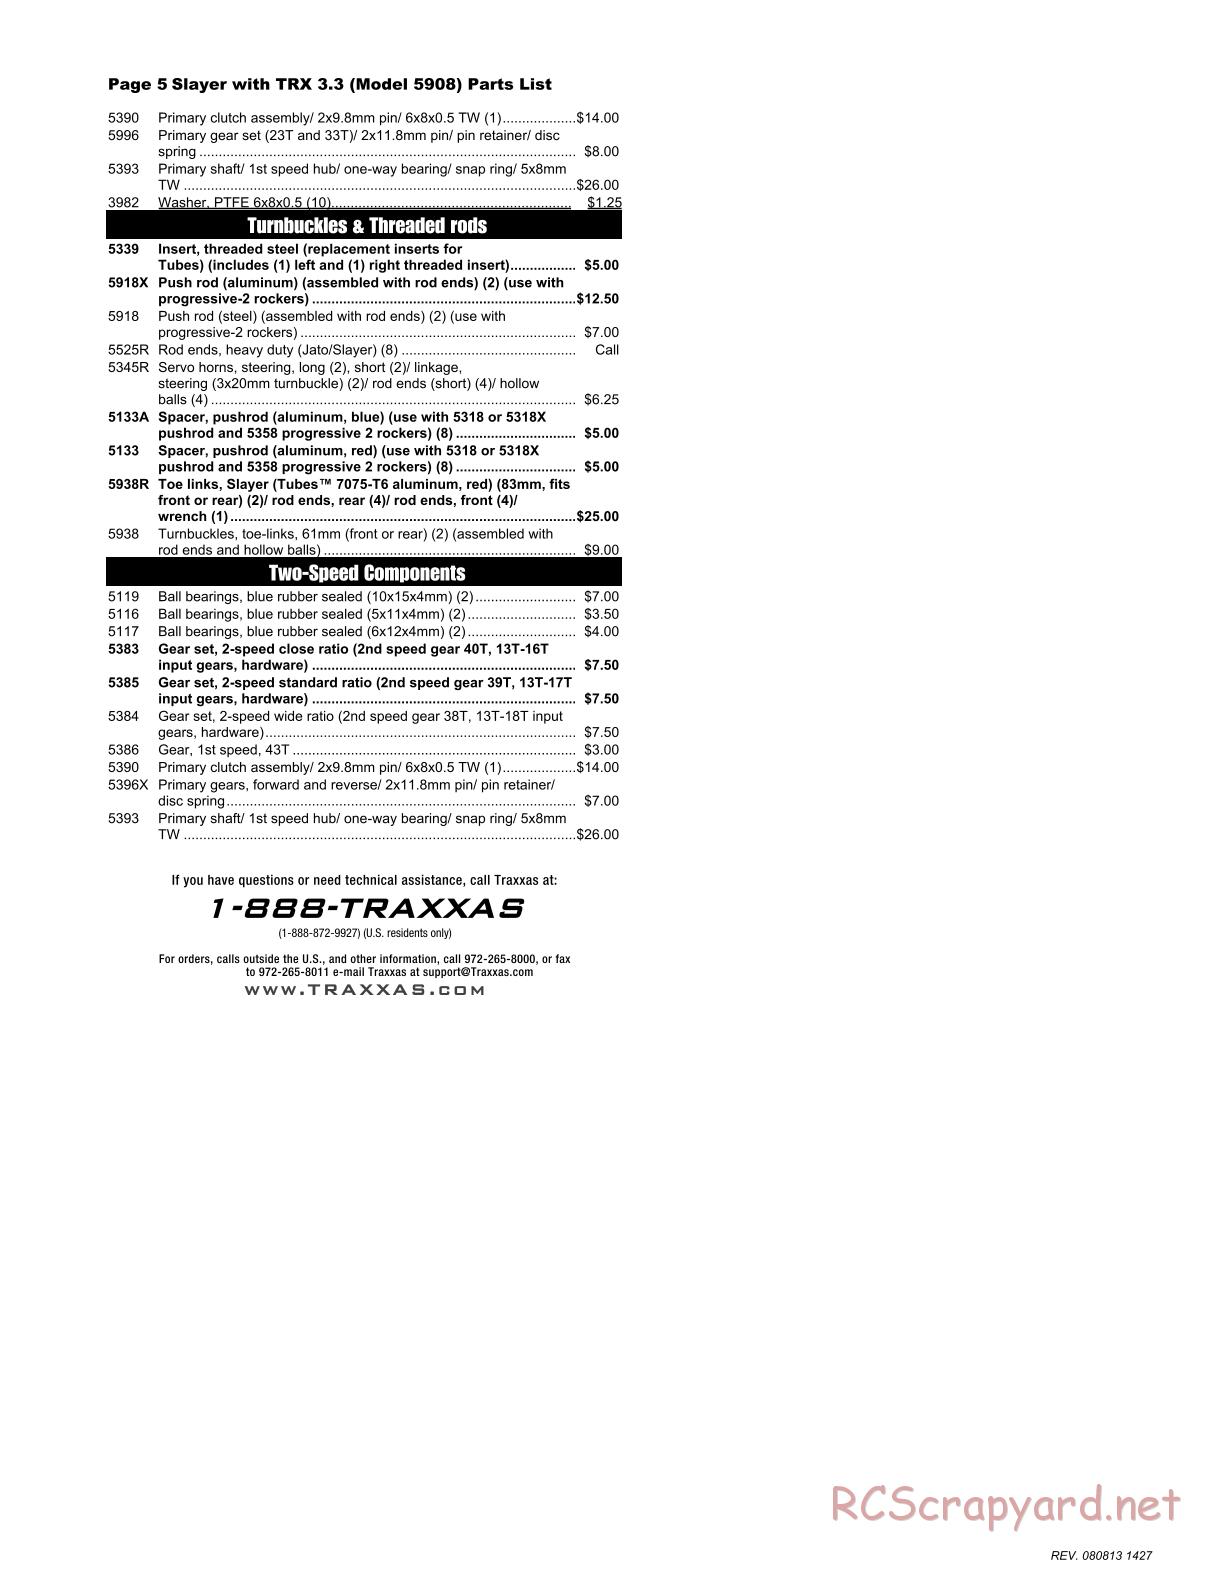 Traxxas - Slayer Pro 4WD (2008) - Parts List - Page 5